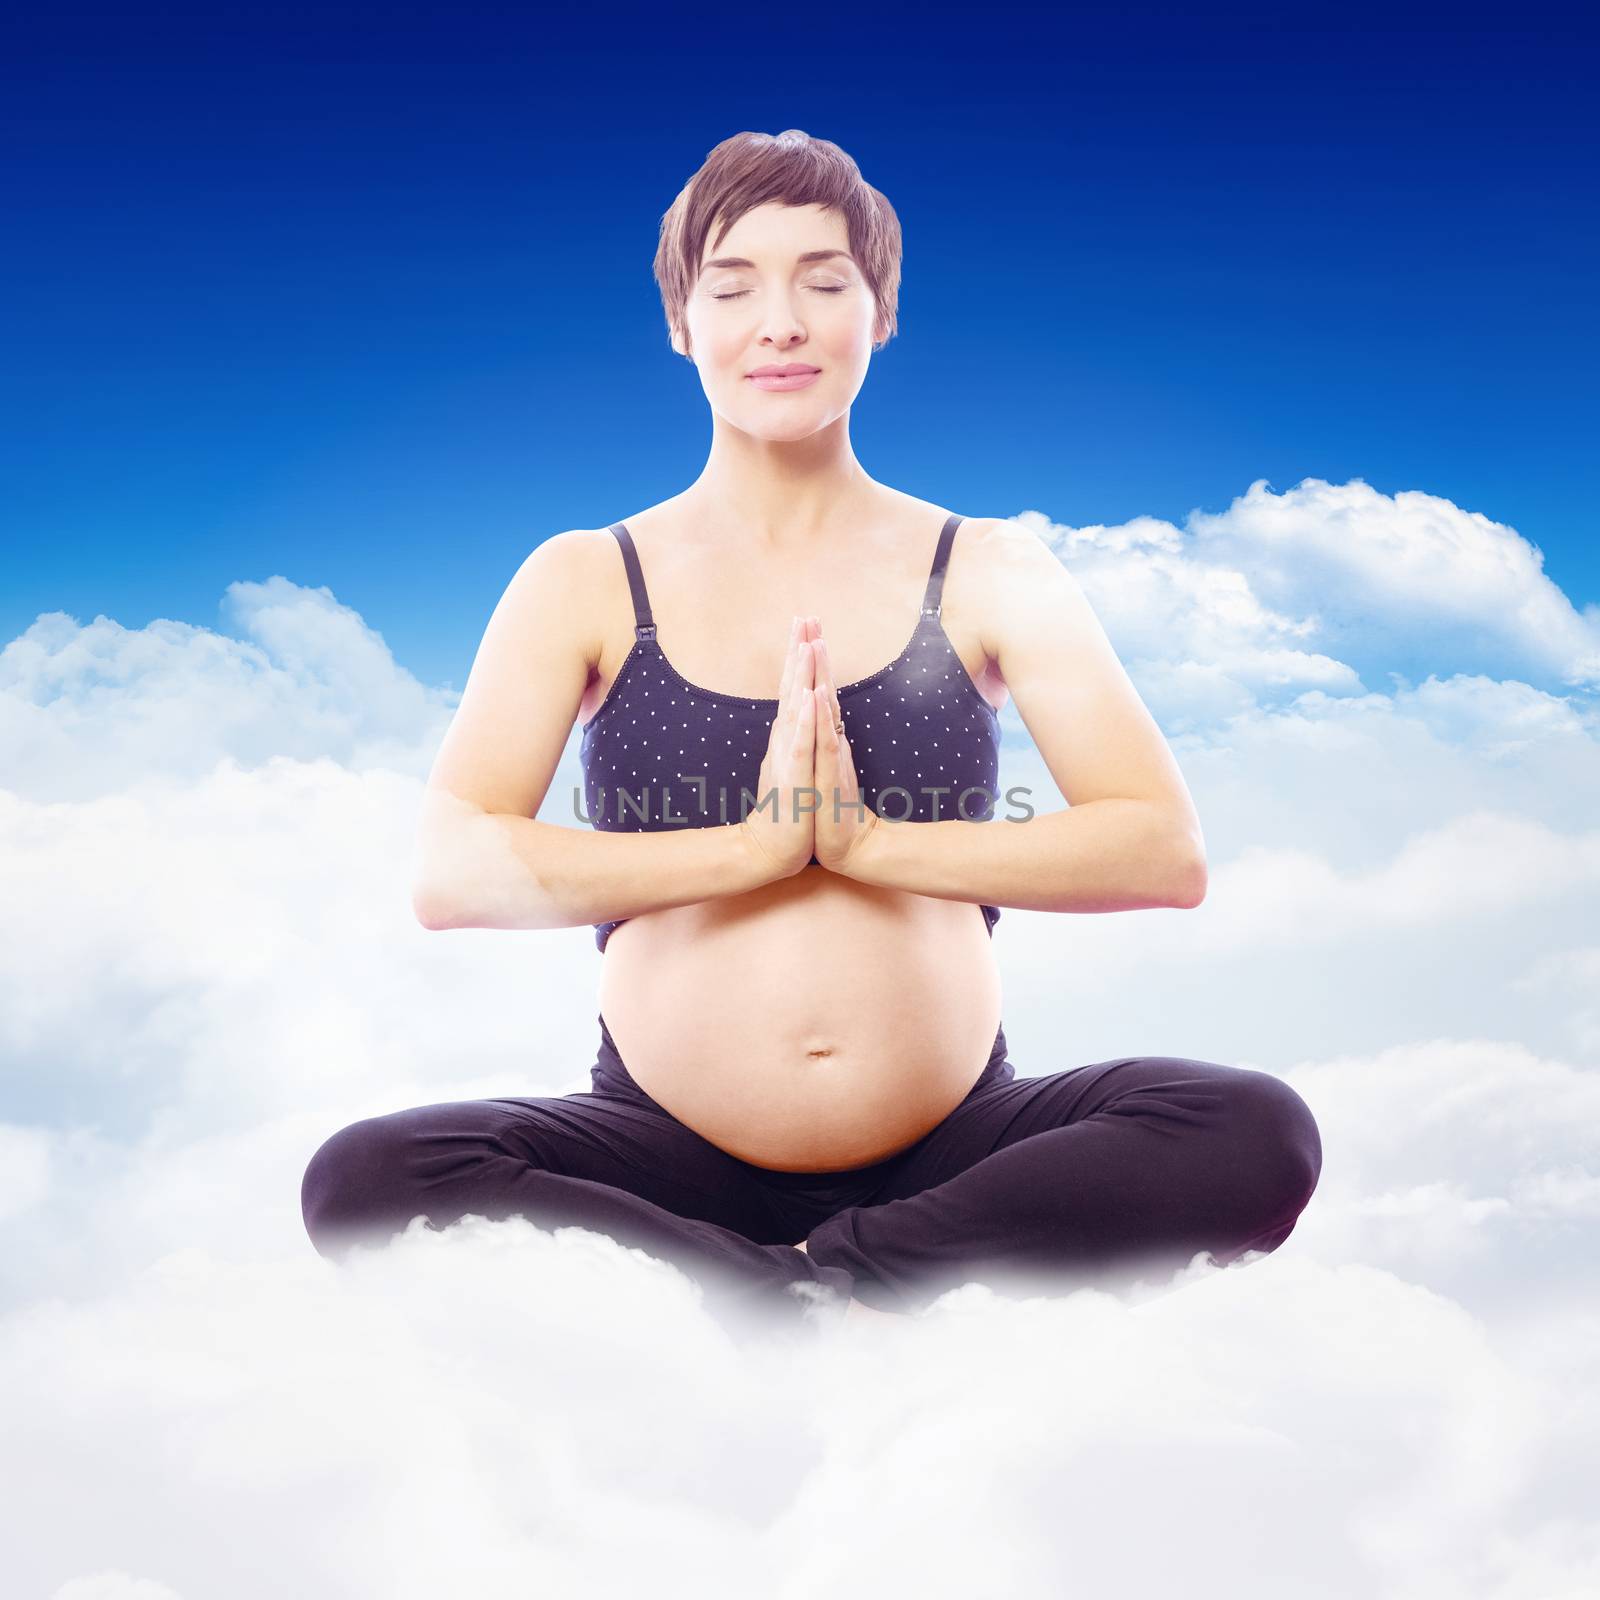 Pregnant woman sitting on exercise mat with hands joined against bright blue sky over clouds